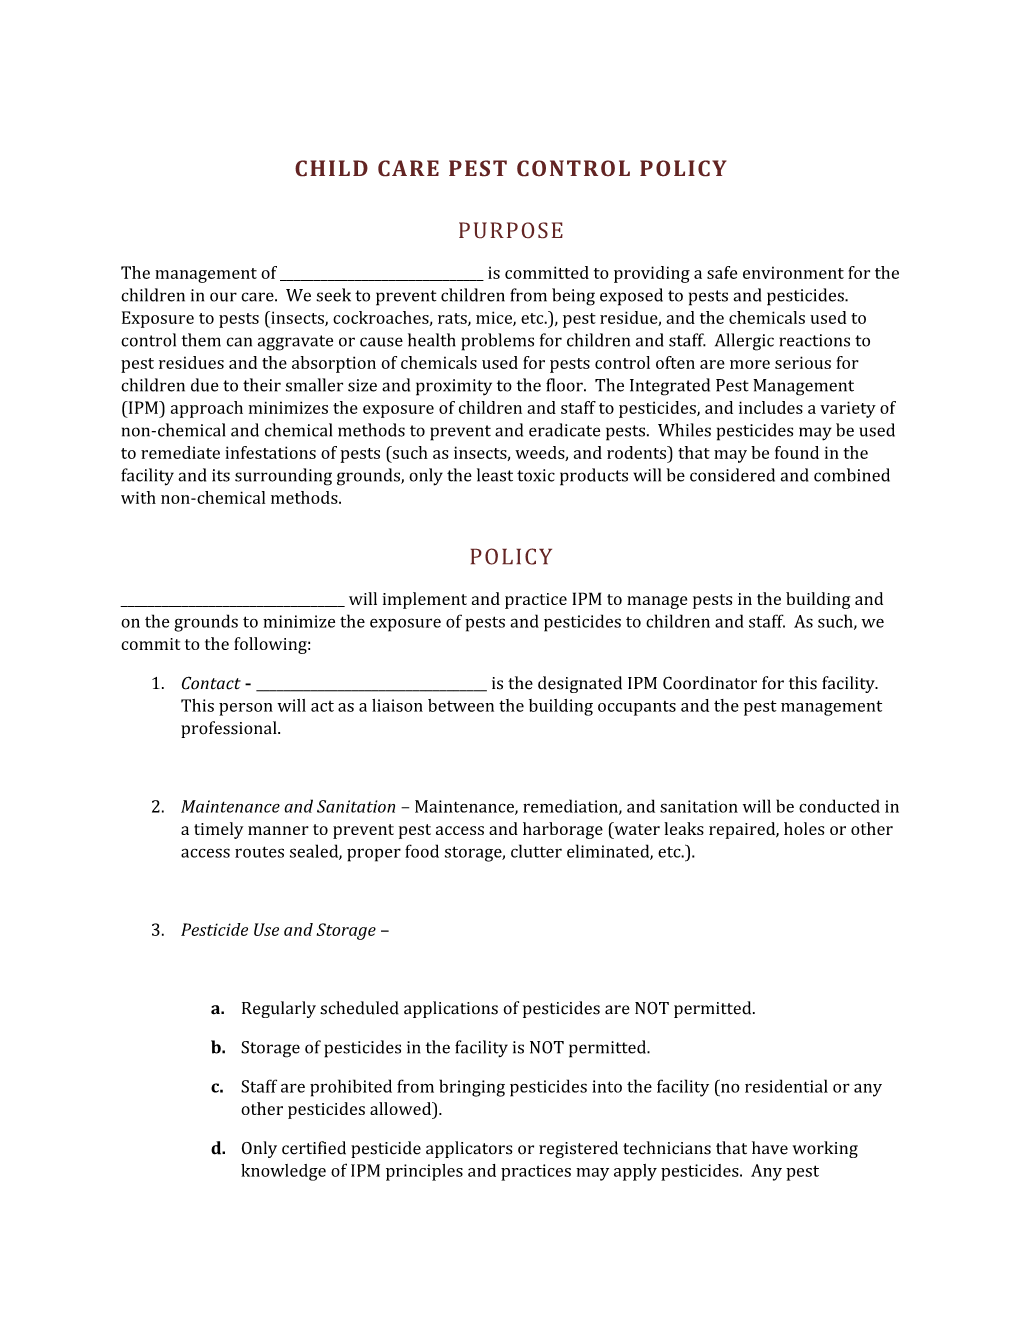 Sample Child Care Pest Control Policy